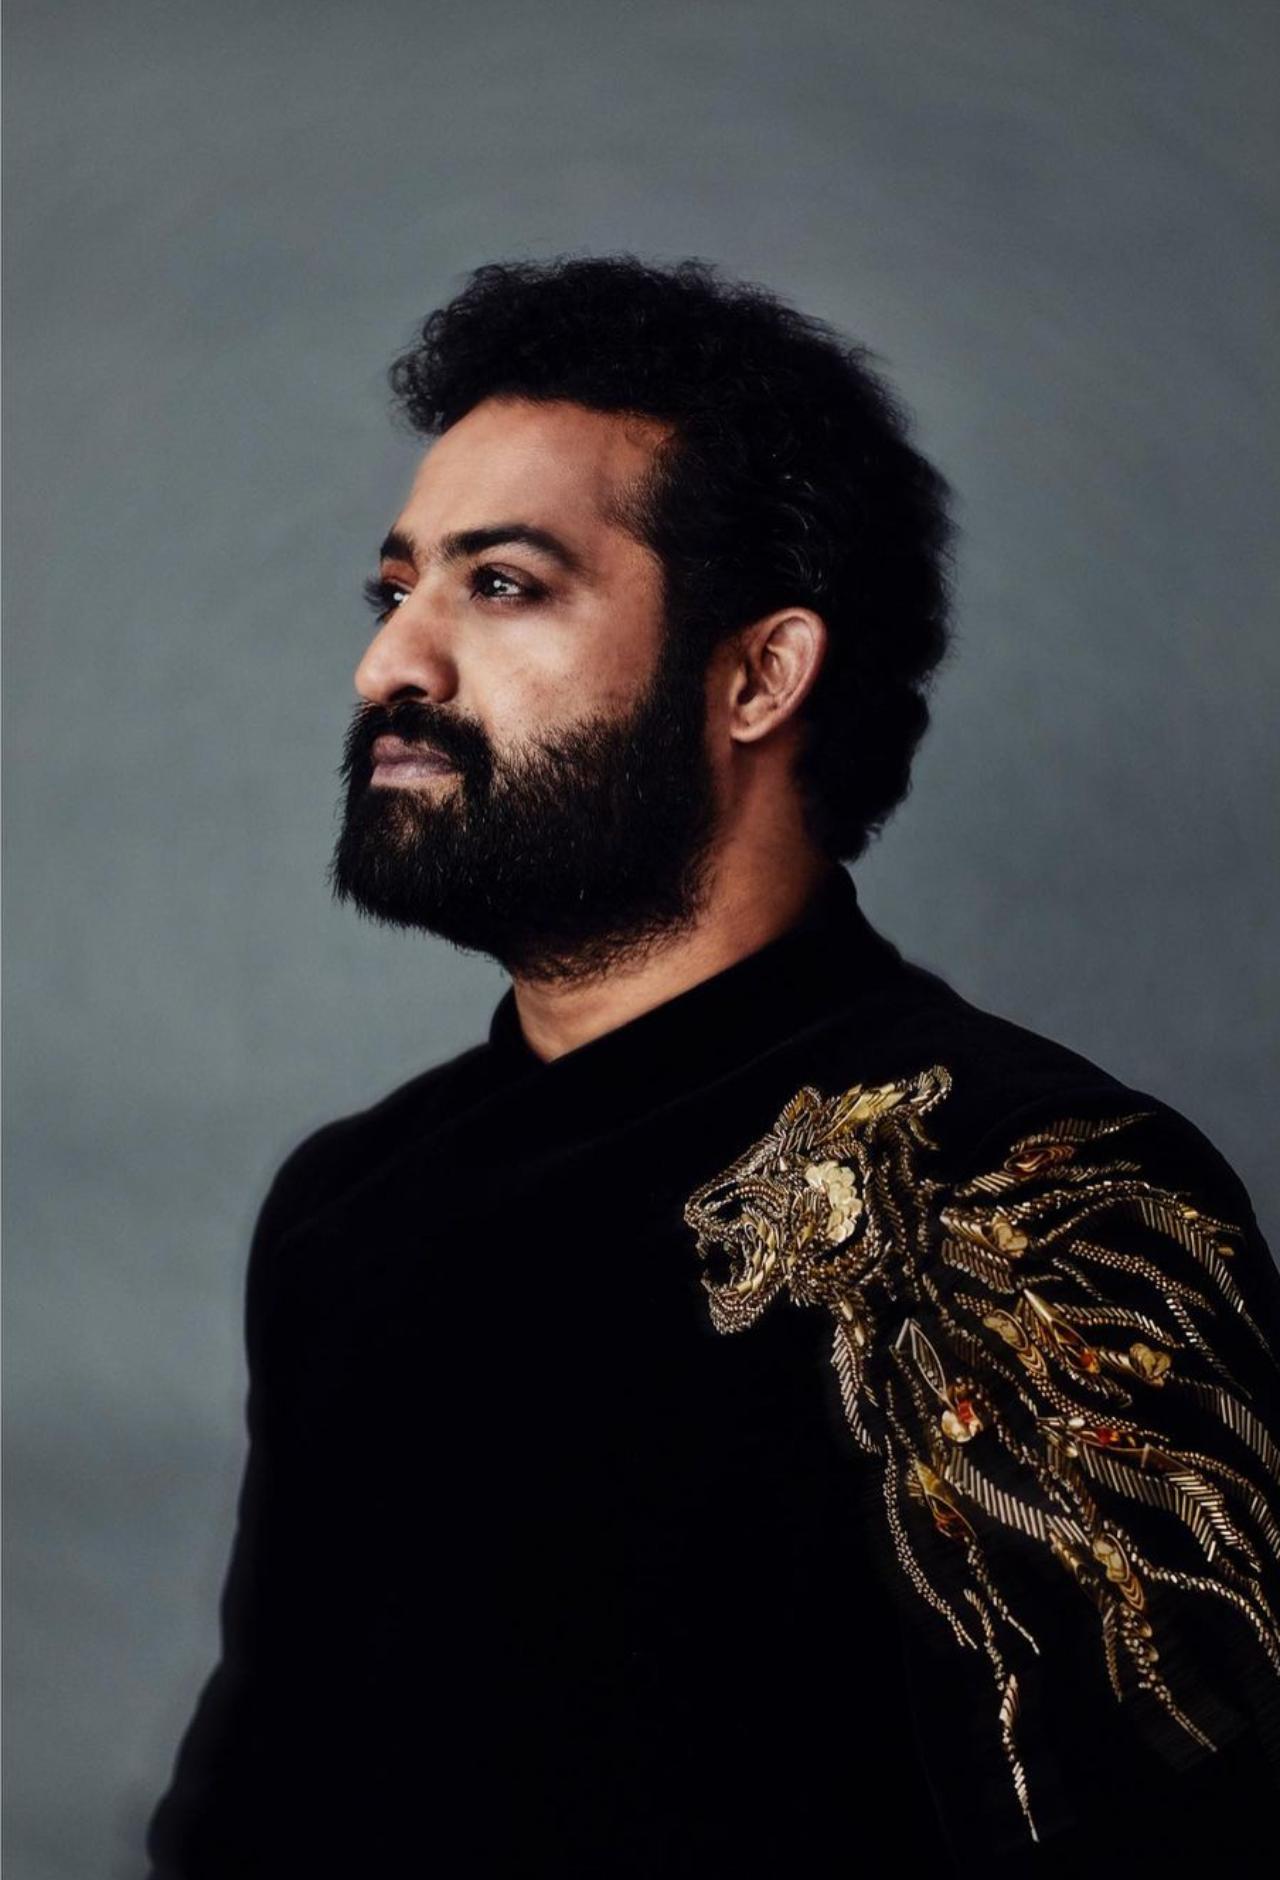 Jr NTR'S black velvet custom-made bandhgala with gold metallic embroidery by Indian fashion designer Gaurav Gupta. The delicate gold embroidery on the black velvet traditional bandhgala drew parallels to the national animal of India - The Tiger. It also is an ode to the iconic interval scene from RRR. And so befitting is this symbolic attire for The Young Tiger, a moniker popularly used for NTR Jr. The outfit was custom made for the global Icon keeping his sentiments in mind. The bandhgala was paired with Brue & Bareskin leather shoes and a Vacheron Constantin watch.